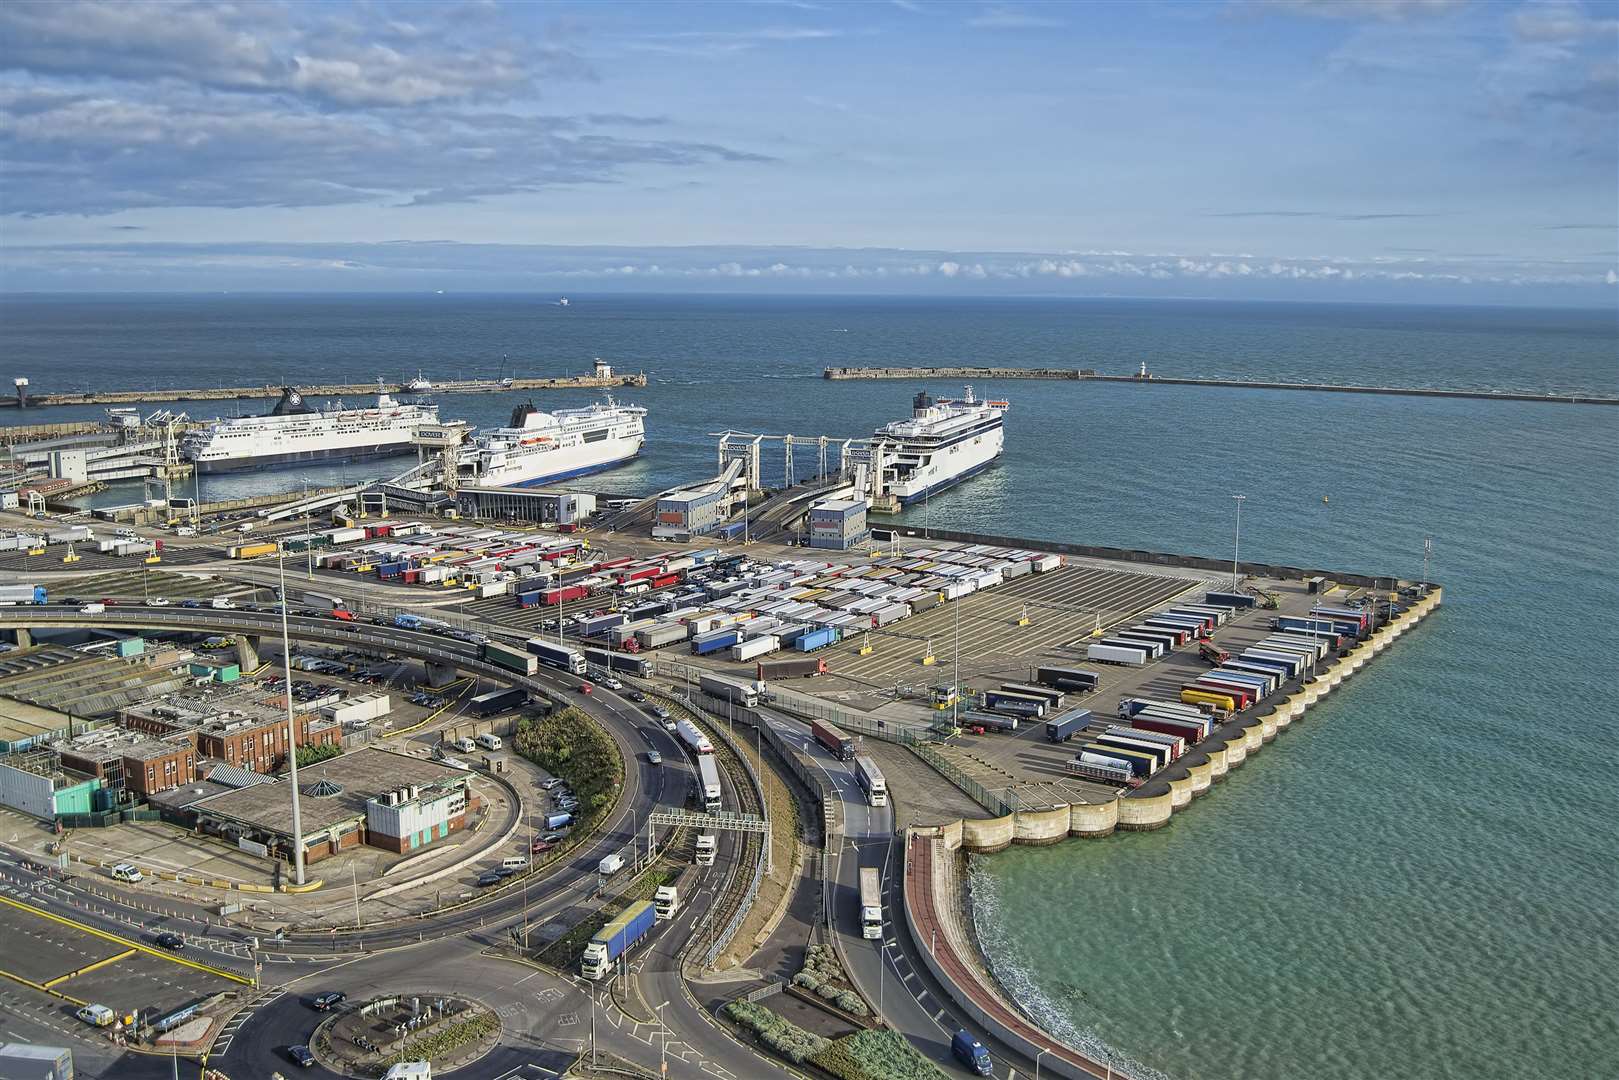 The new ferry will sail between Dover (pictured) and Calais